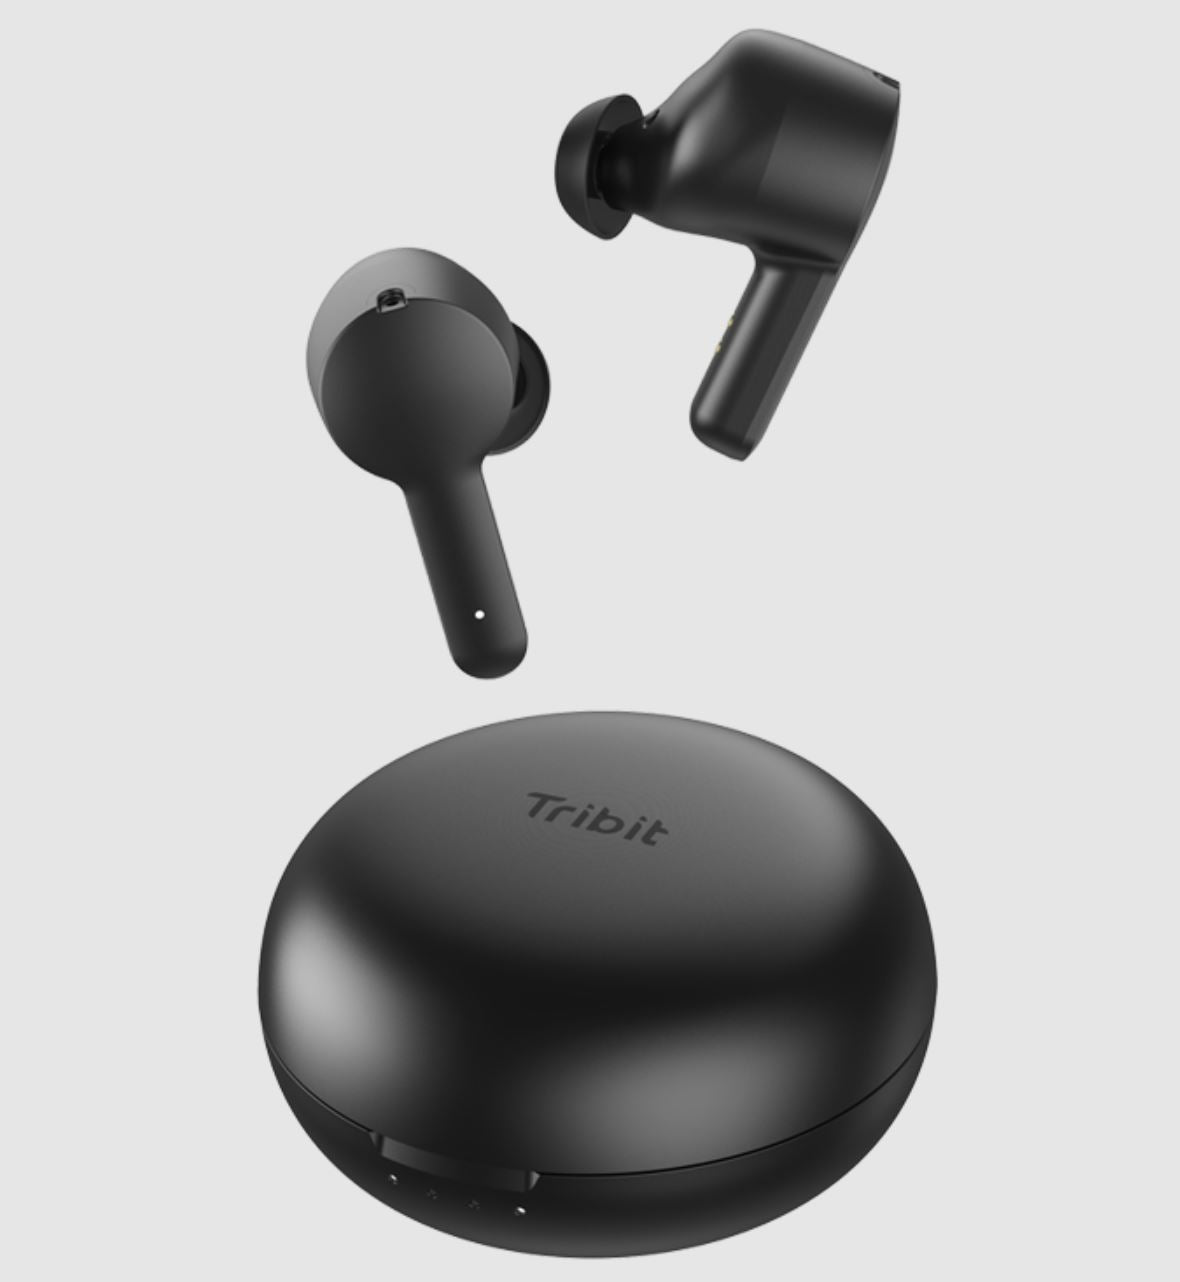 Tribit Flybuds NC True Wireless Earbuds 10h Playtime Bluetooth 5.0 with Active Noise Cancellation 4 mics Smart Touch Controls IPX4 Sweatproof BTHA1